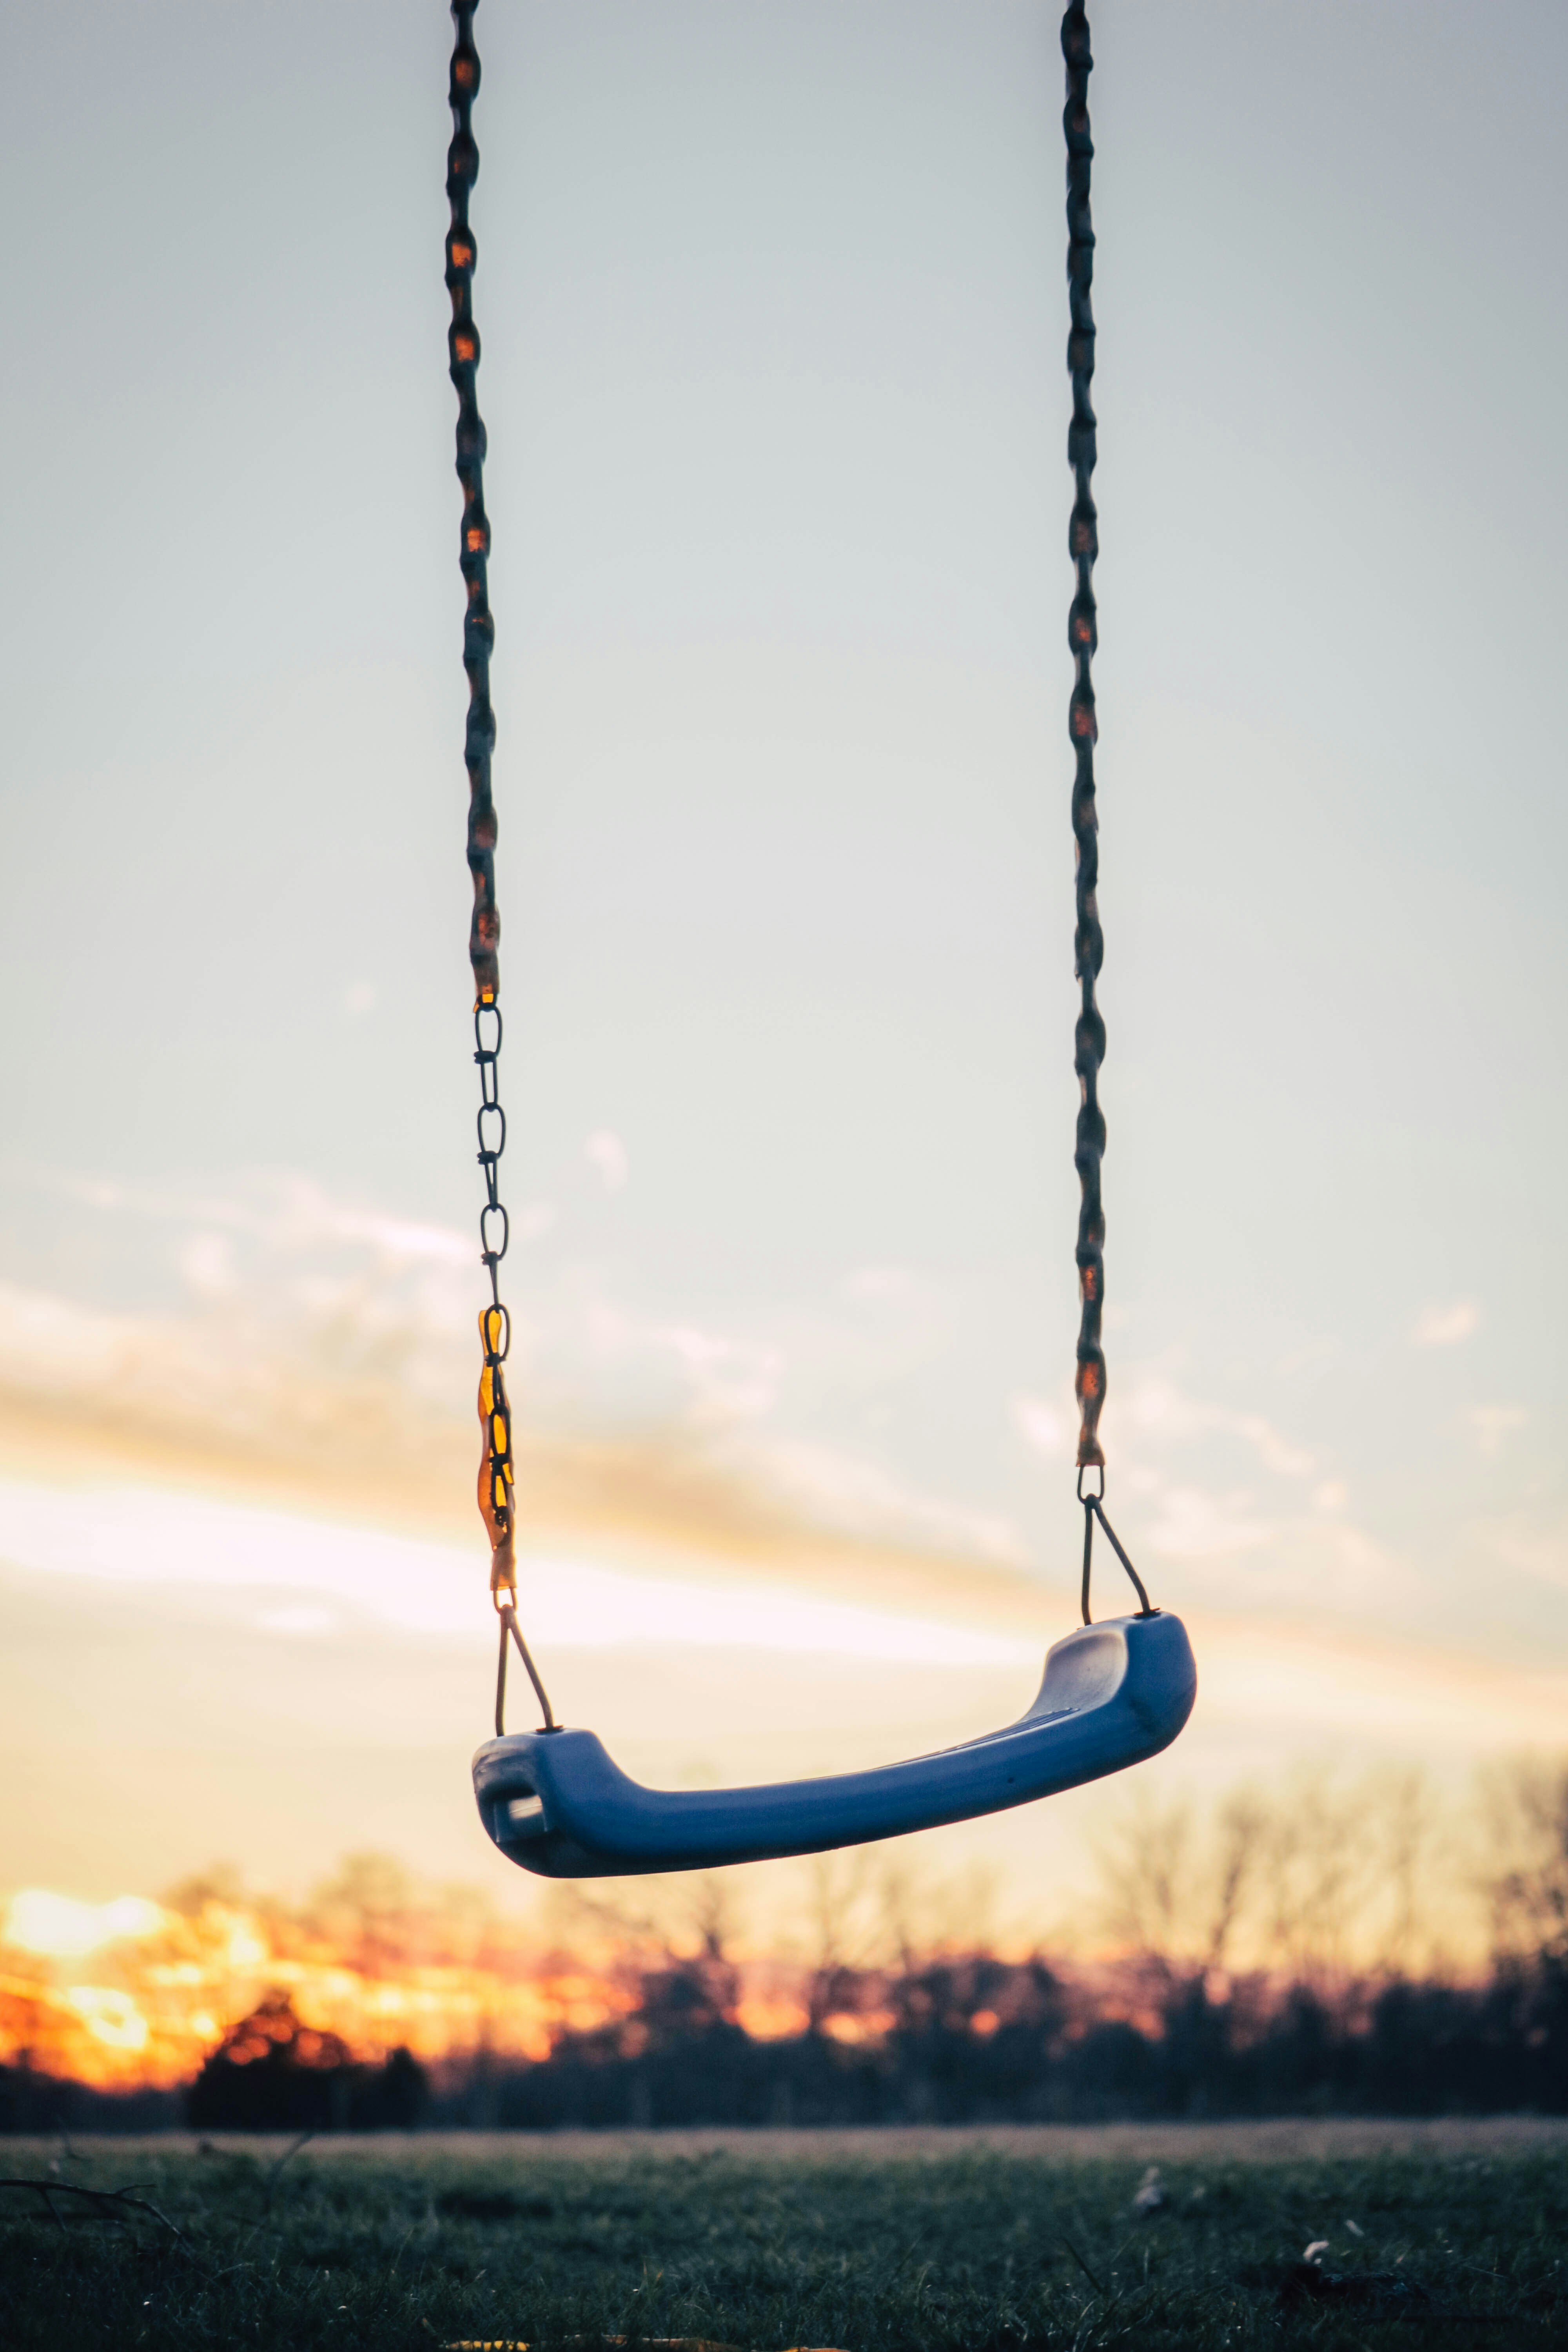 100+ Swing Pictures Download Free